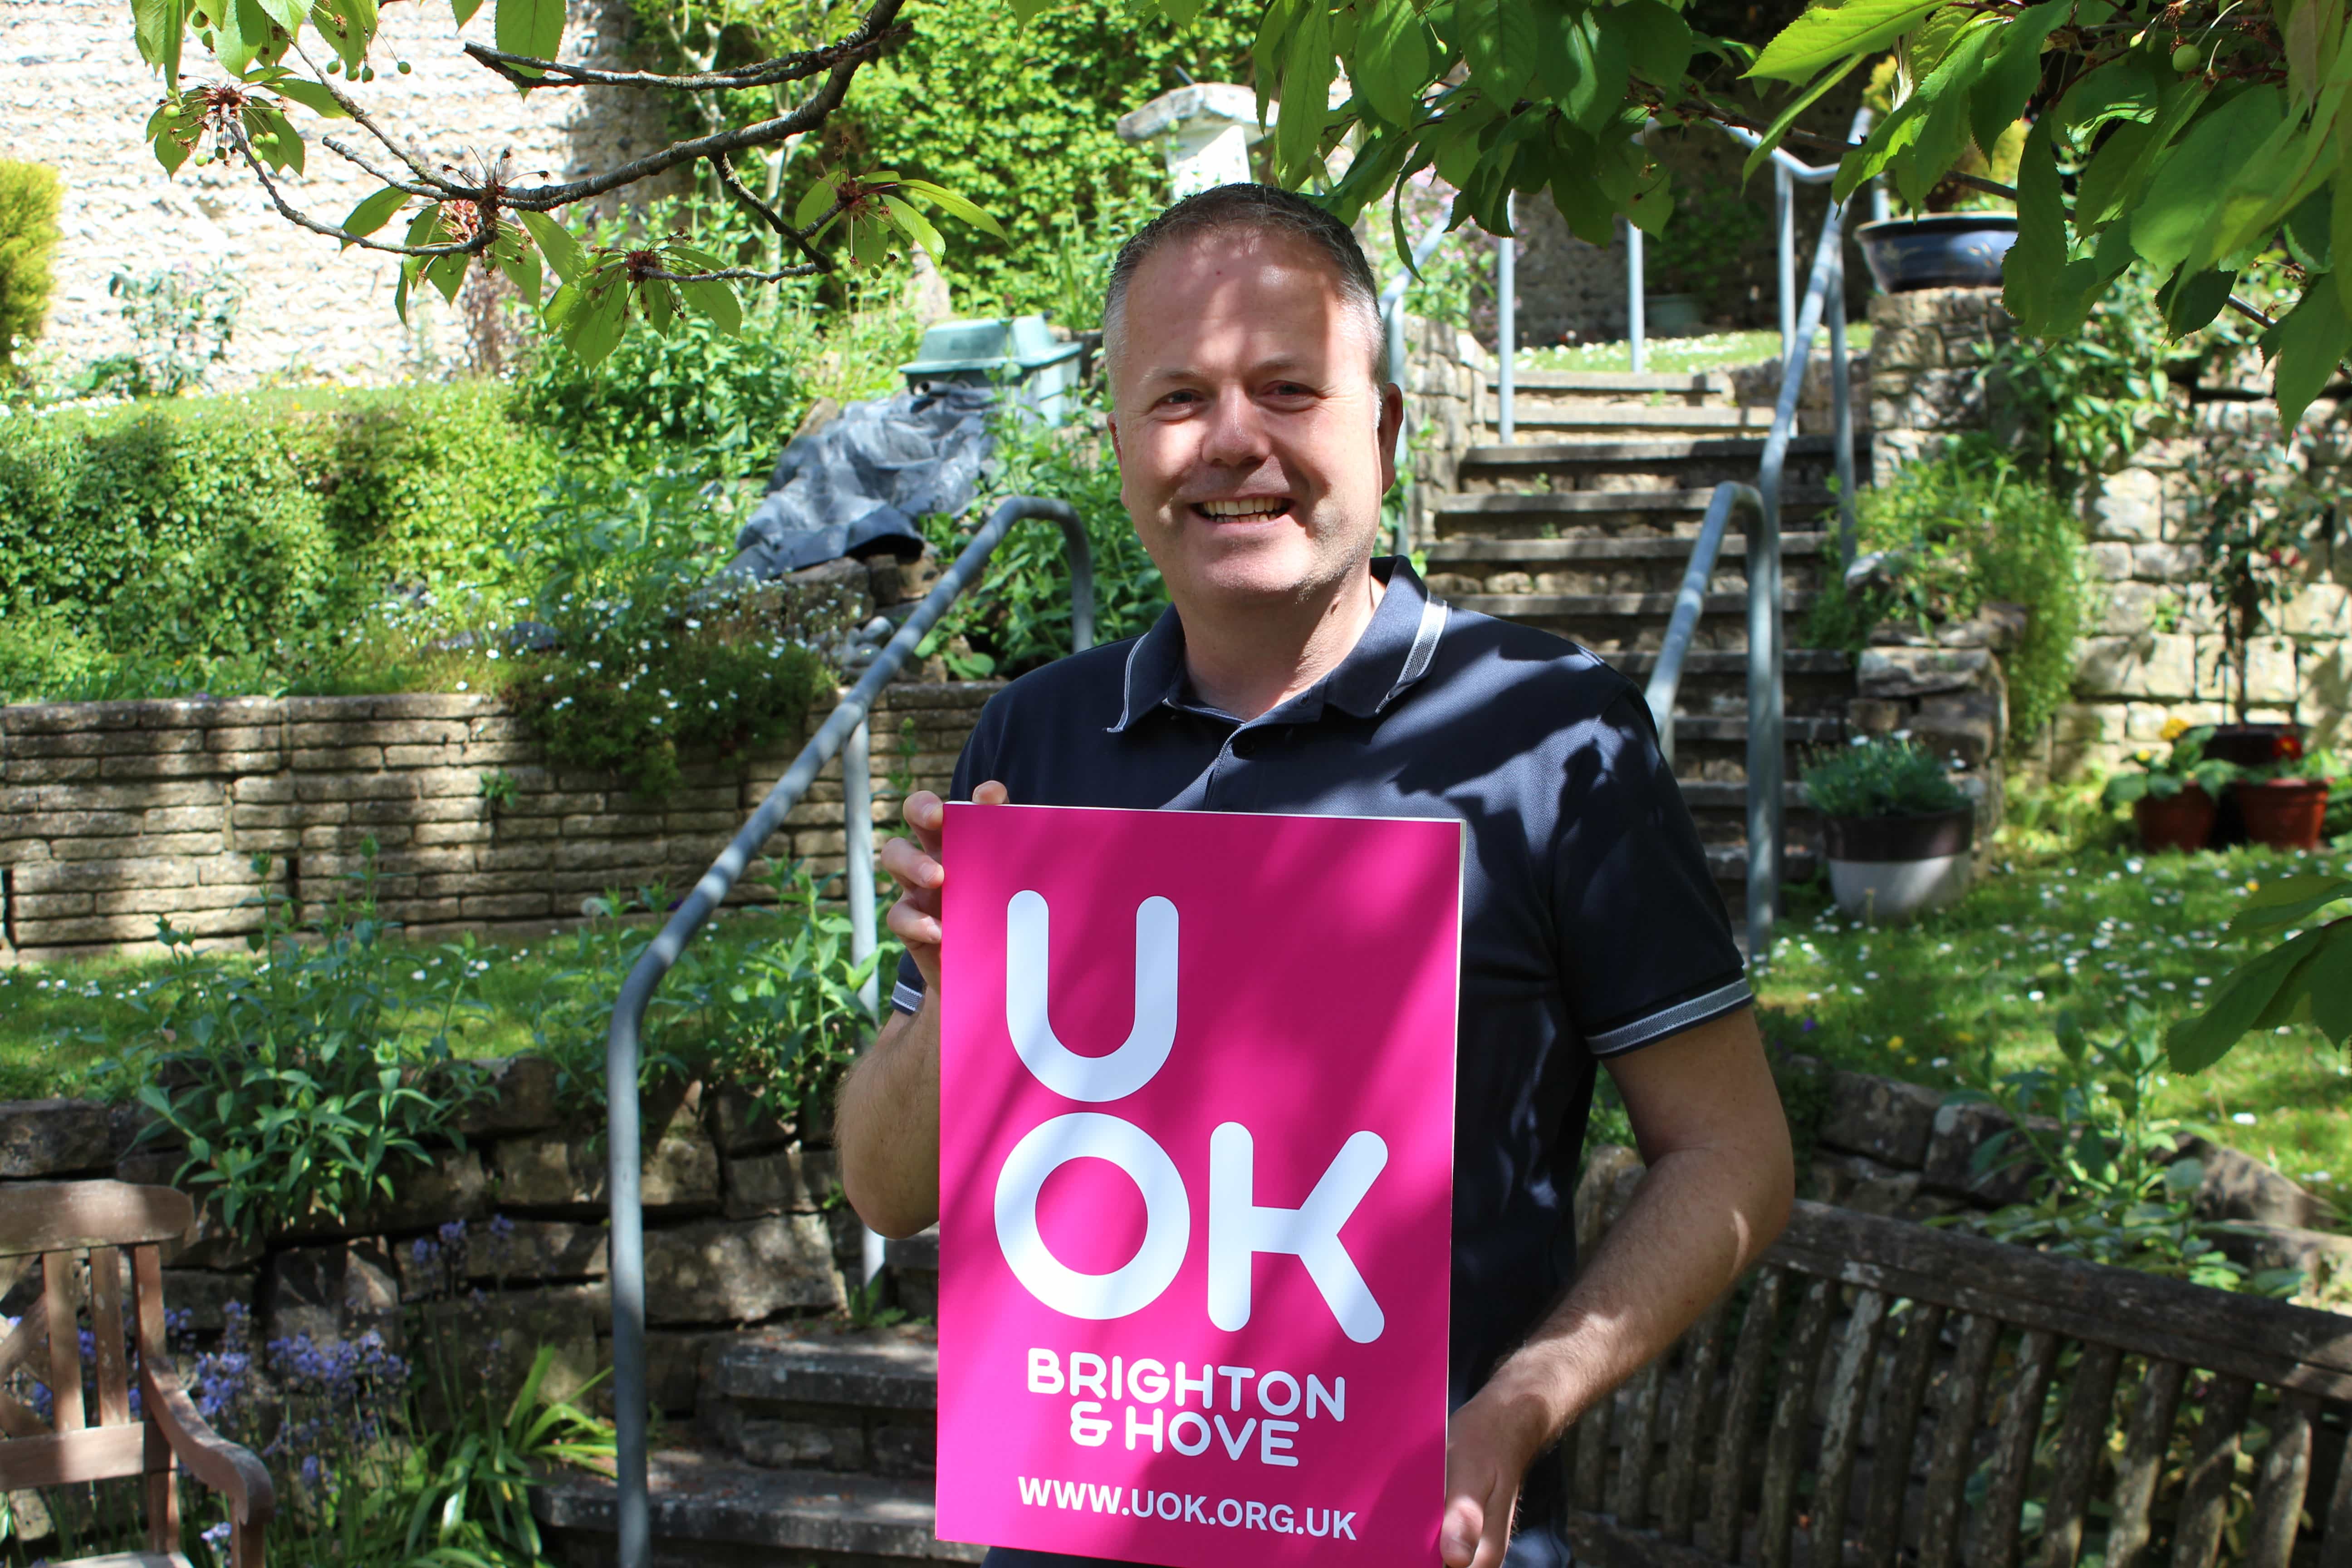 We’ve changed our name from Community Roots, to UOK Brighton & Hoveimage